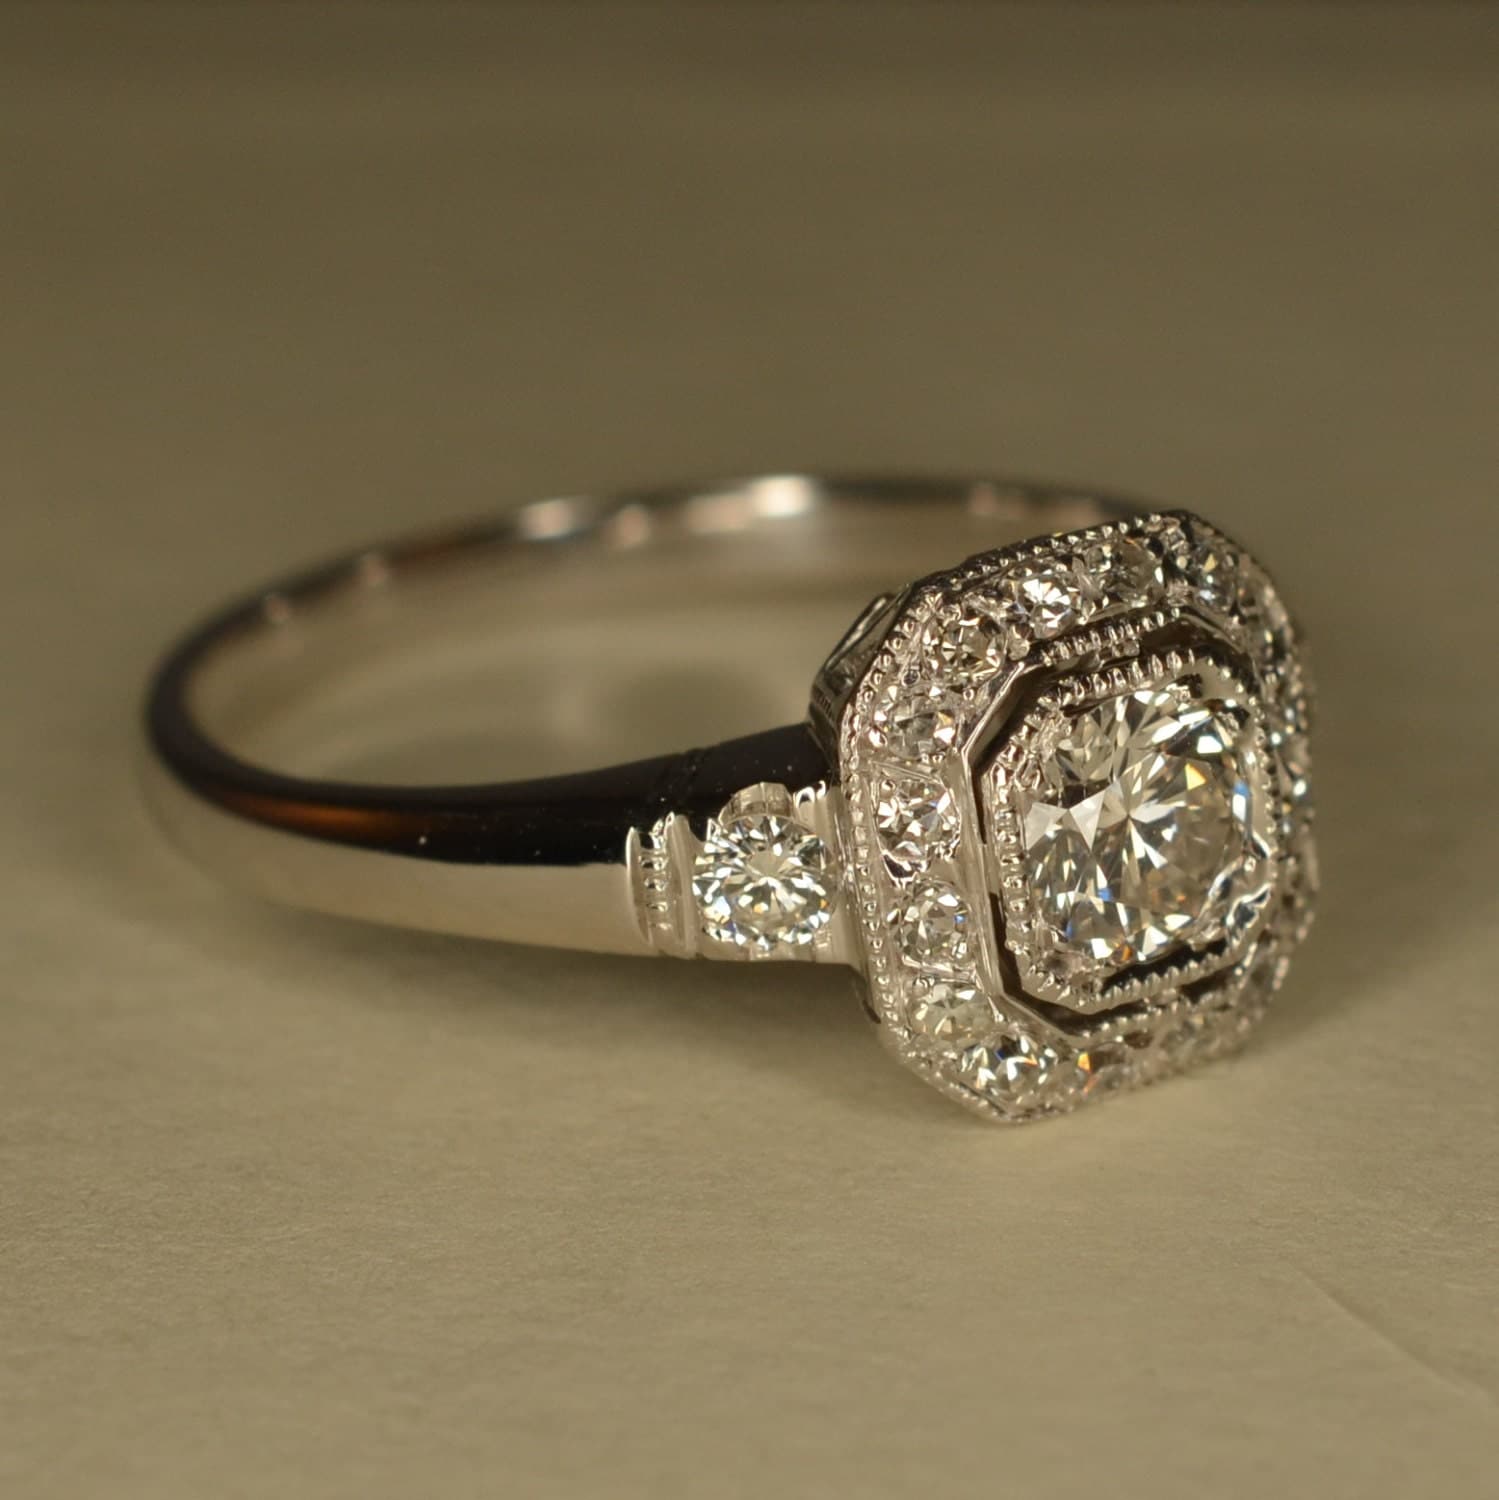 RESERVED Art Deco Inspired Wedding Ring Platinum and 14k